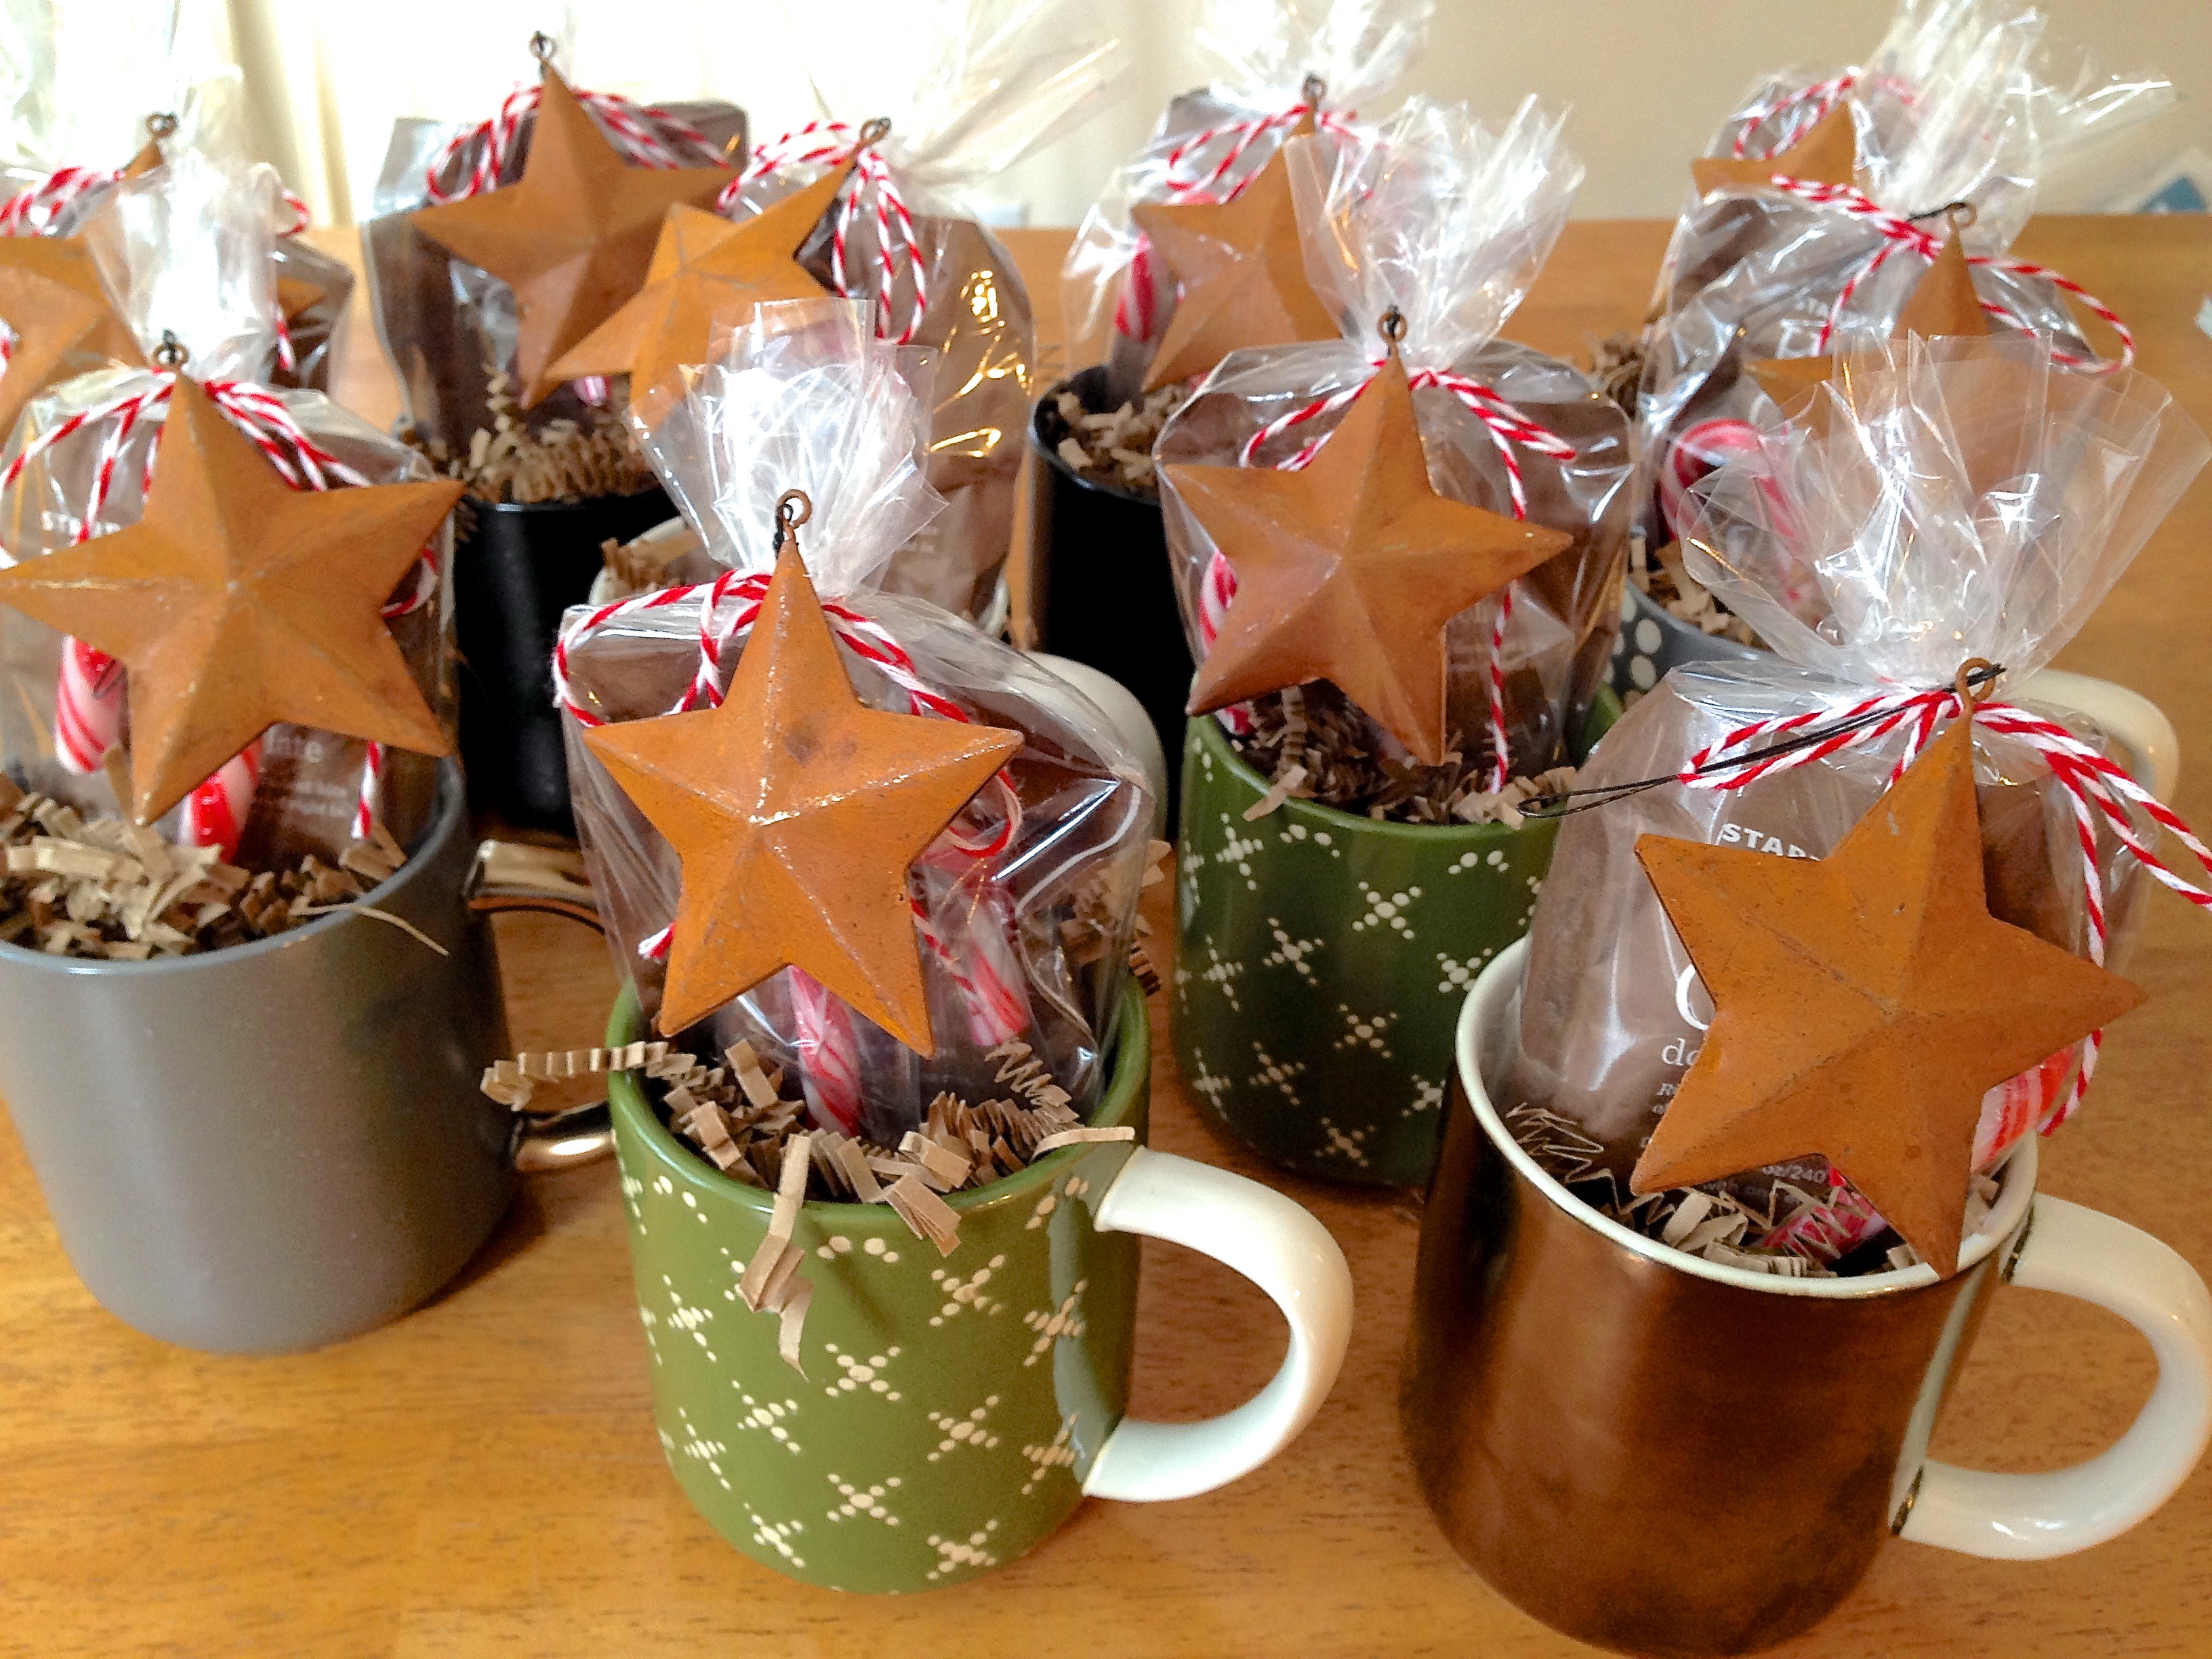 12 Days of Projects – Day 9 Cocoa Gift Mugs – p.s. bonjour